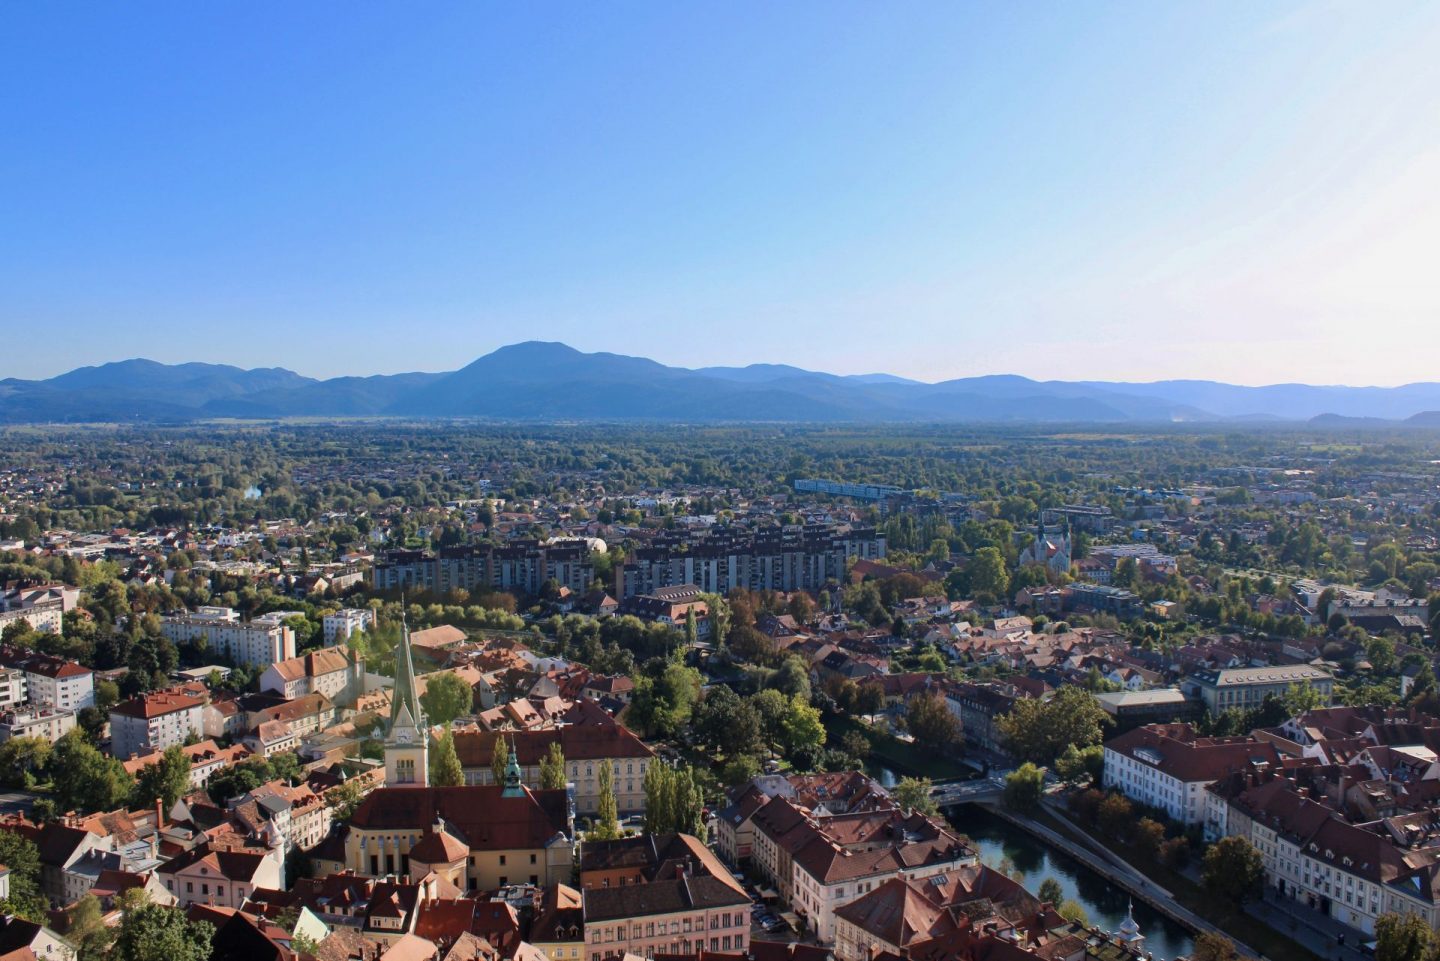 24 hours in Ljubljana food & wine: View from the castle tower in Ljubljana if you have 24 hours to spend there